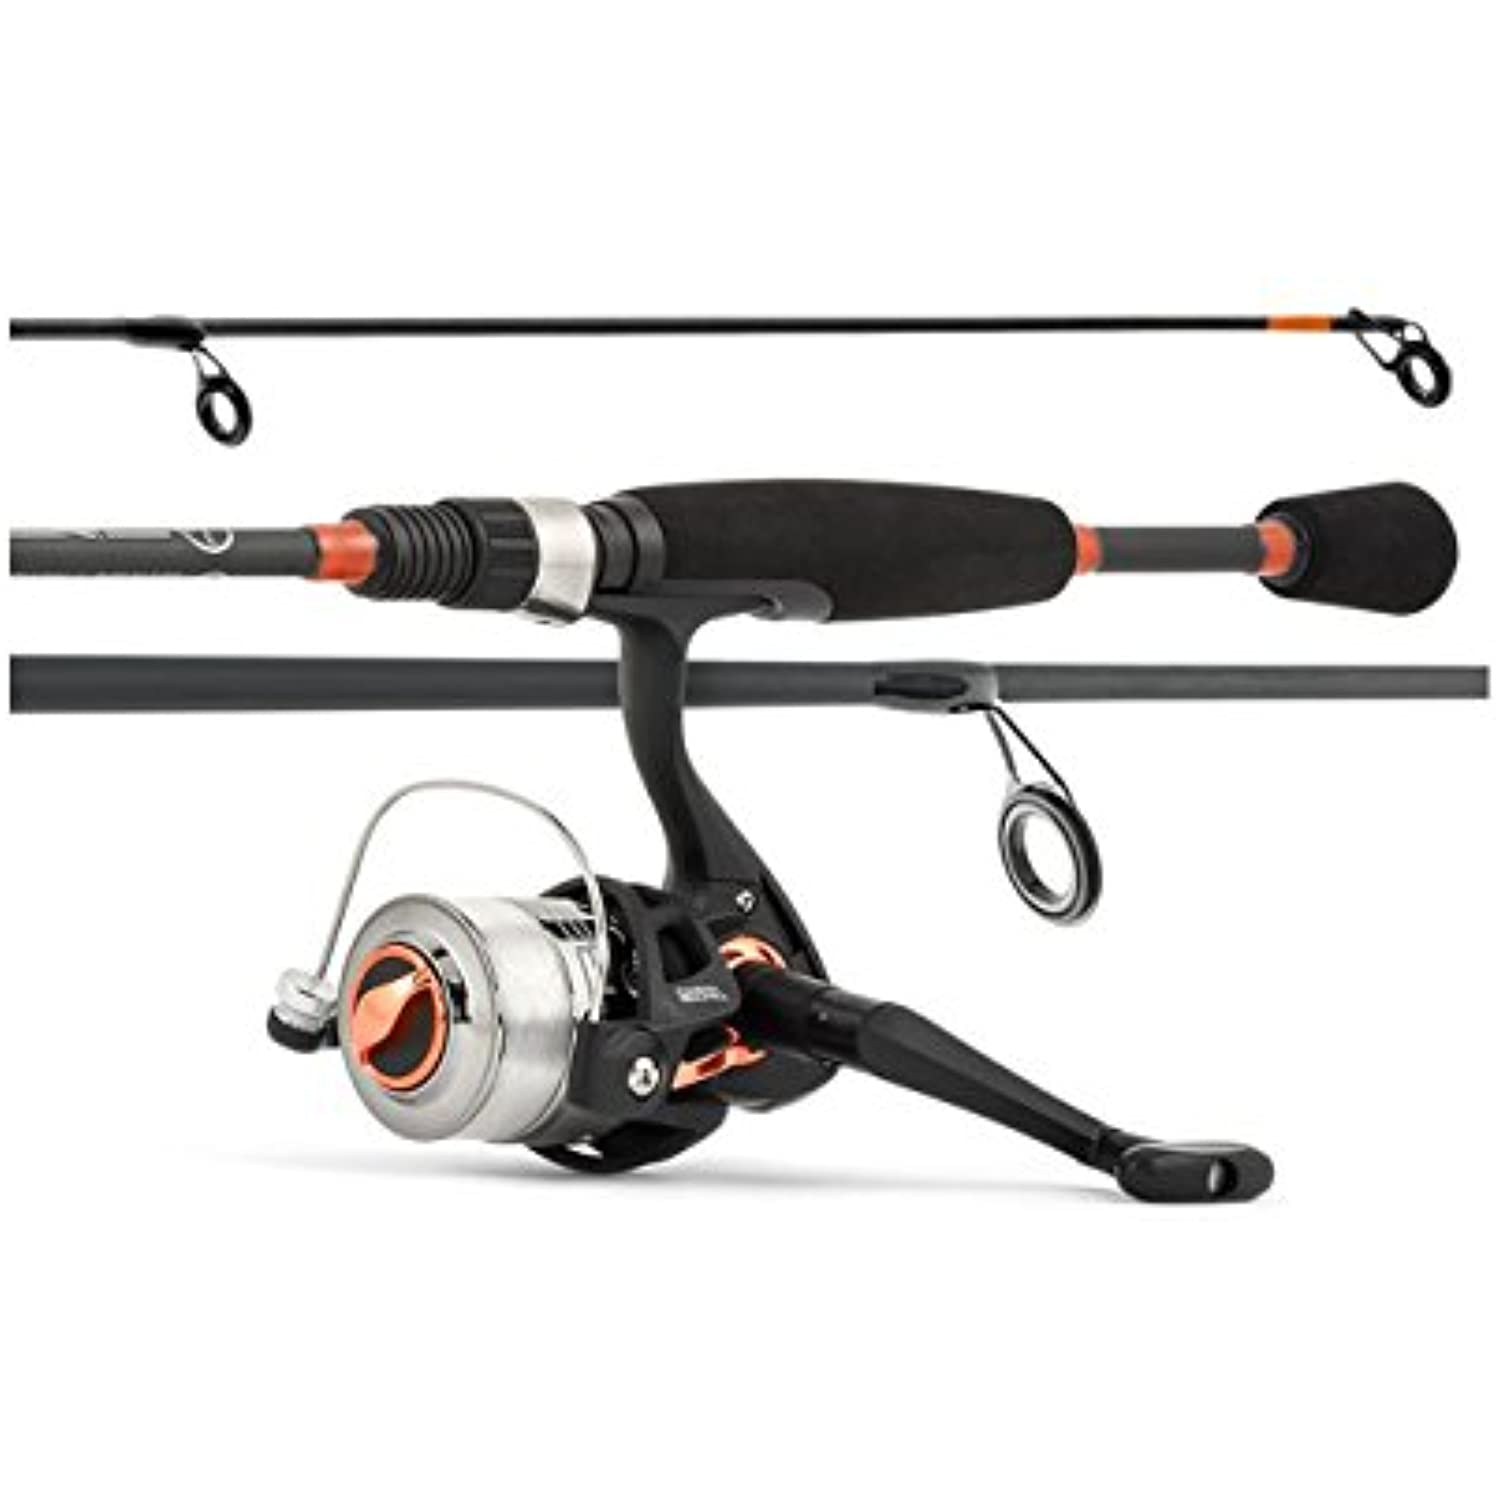 SouthBend R2F3 All Species Spinning 5'6 R2F3-AL/S Rod/Reel Combo